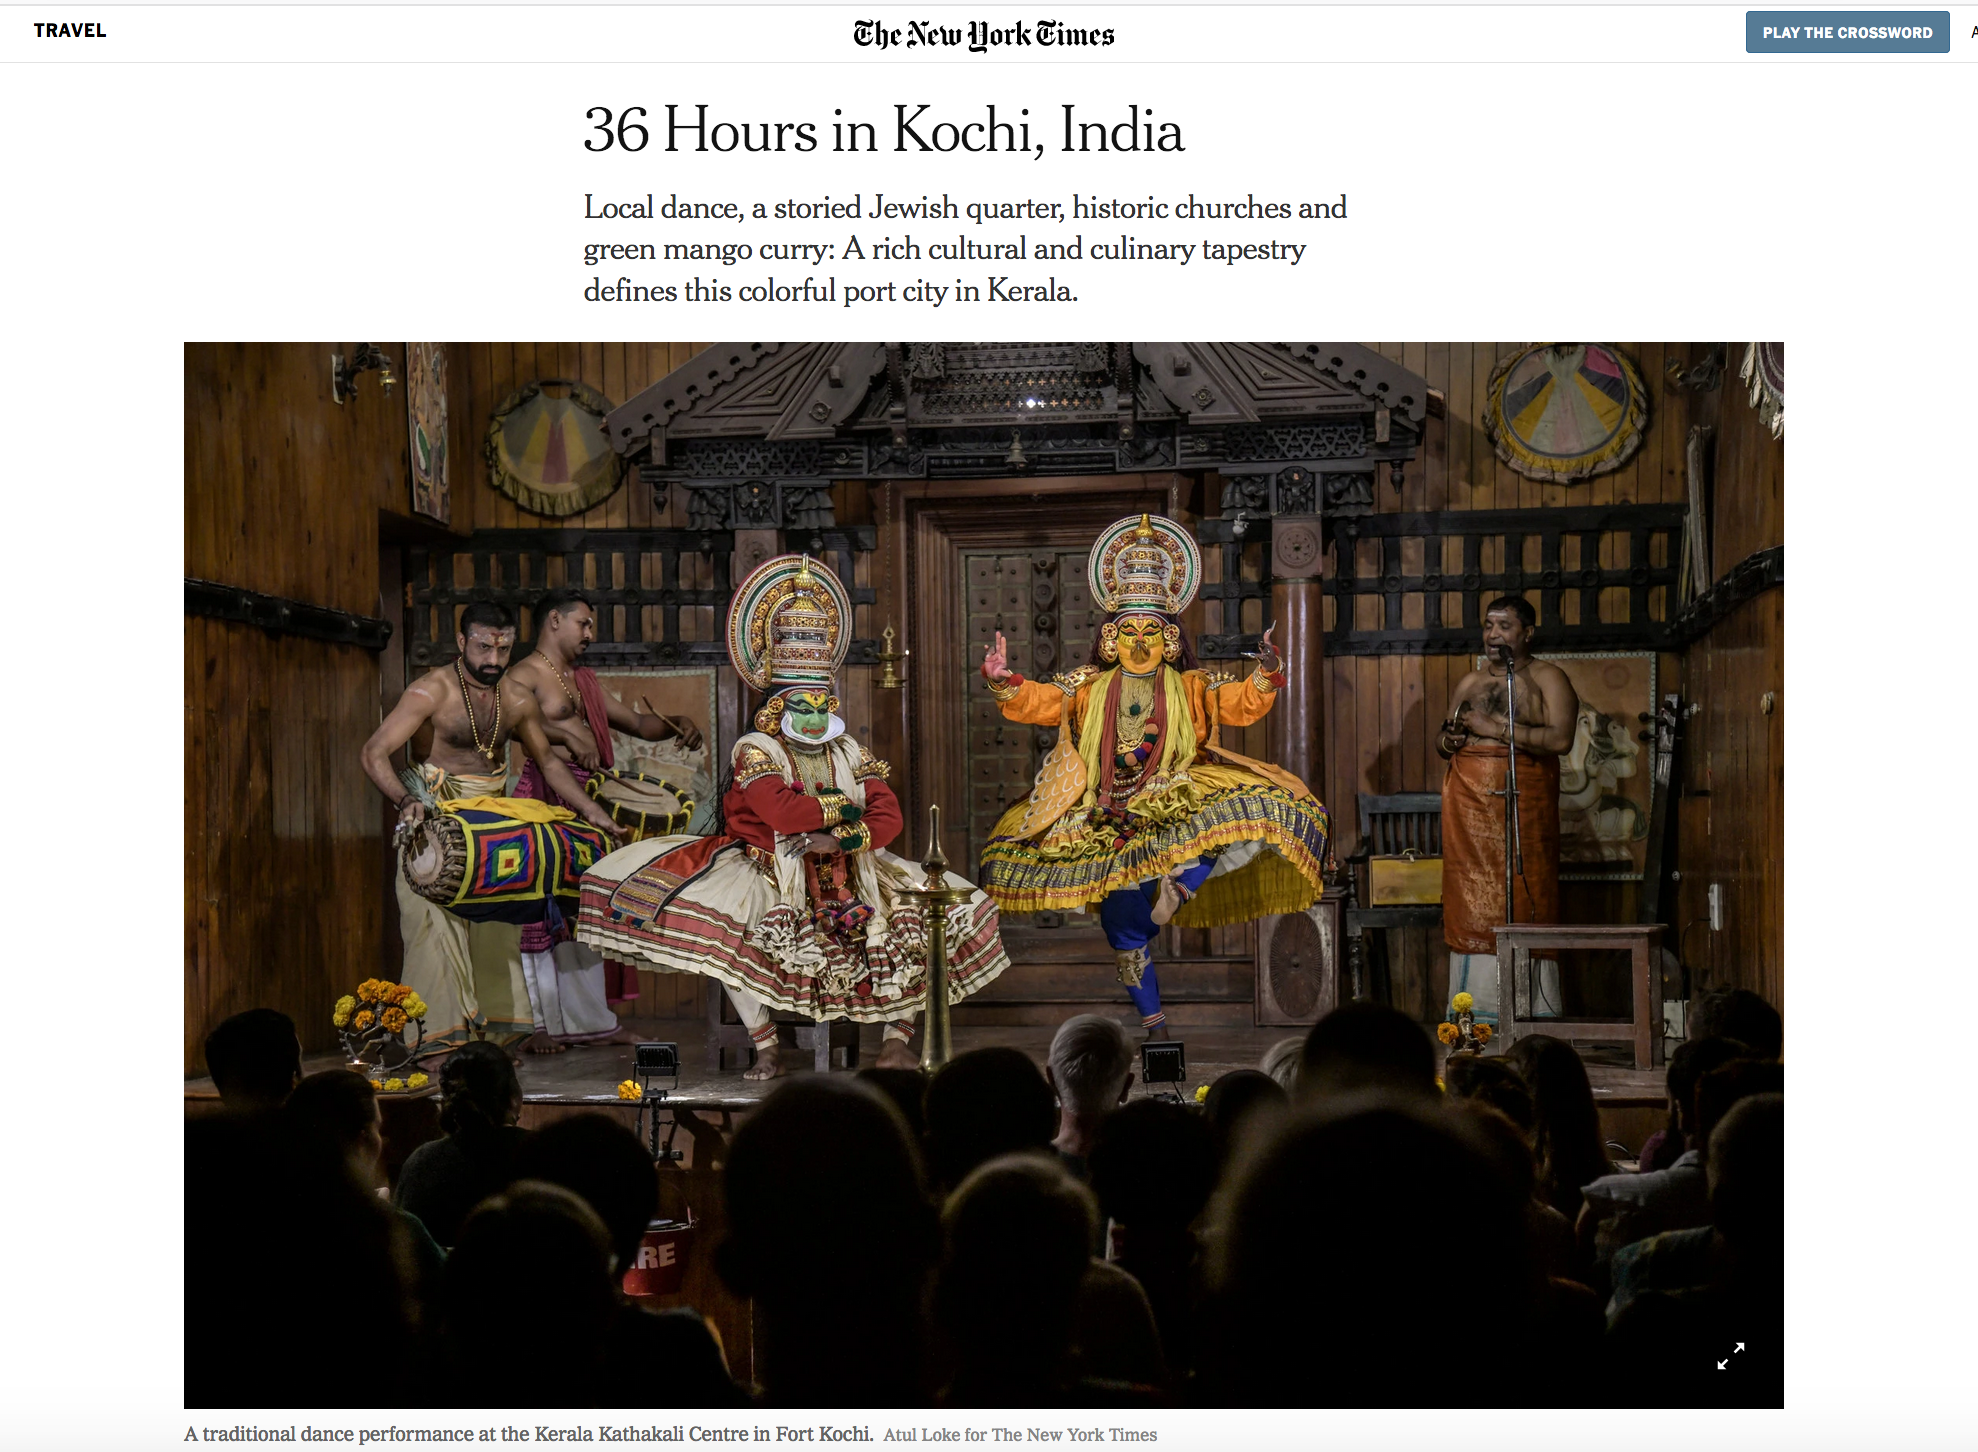 New York Times: 36 Hours in Kochi, India